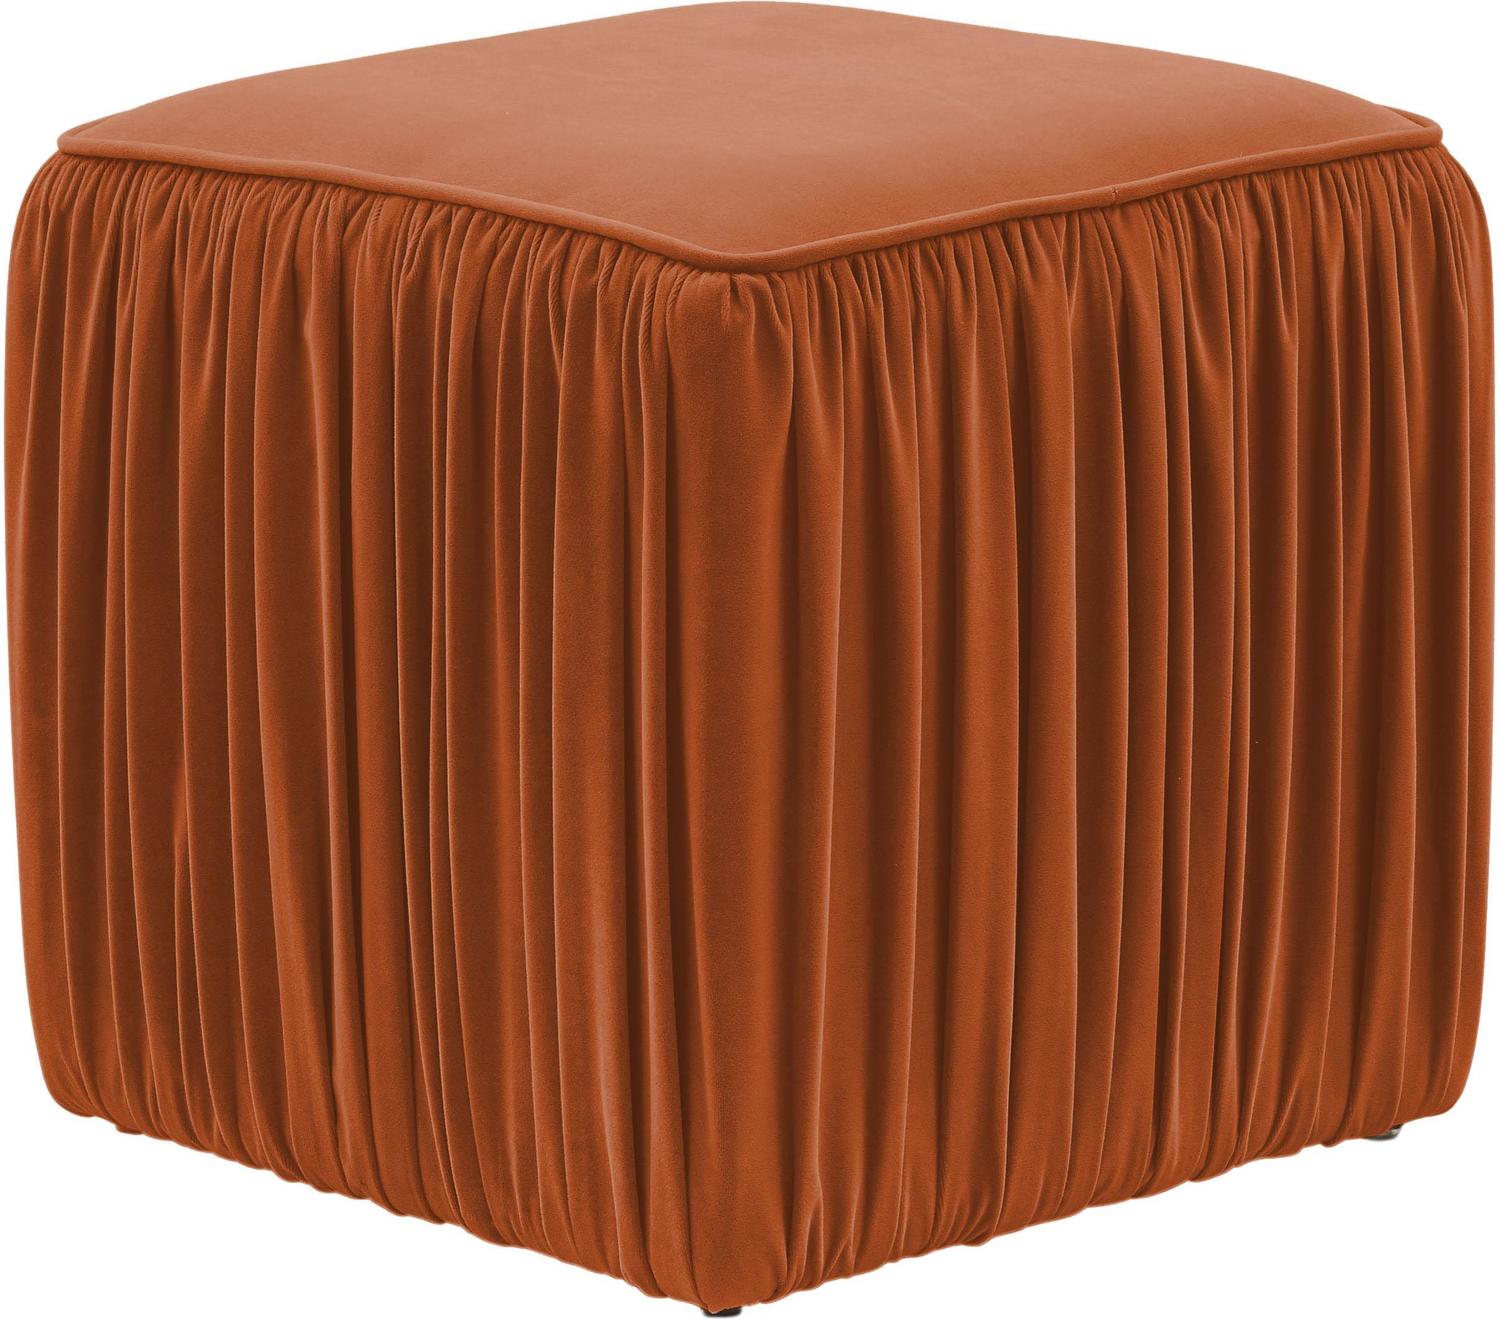 Tov Furniture Ottomans Ottomans and Benches Cognac